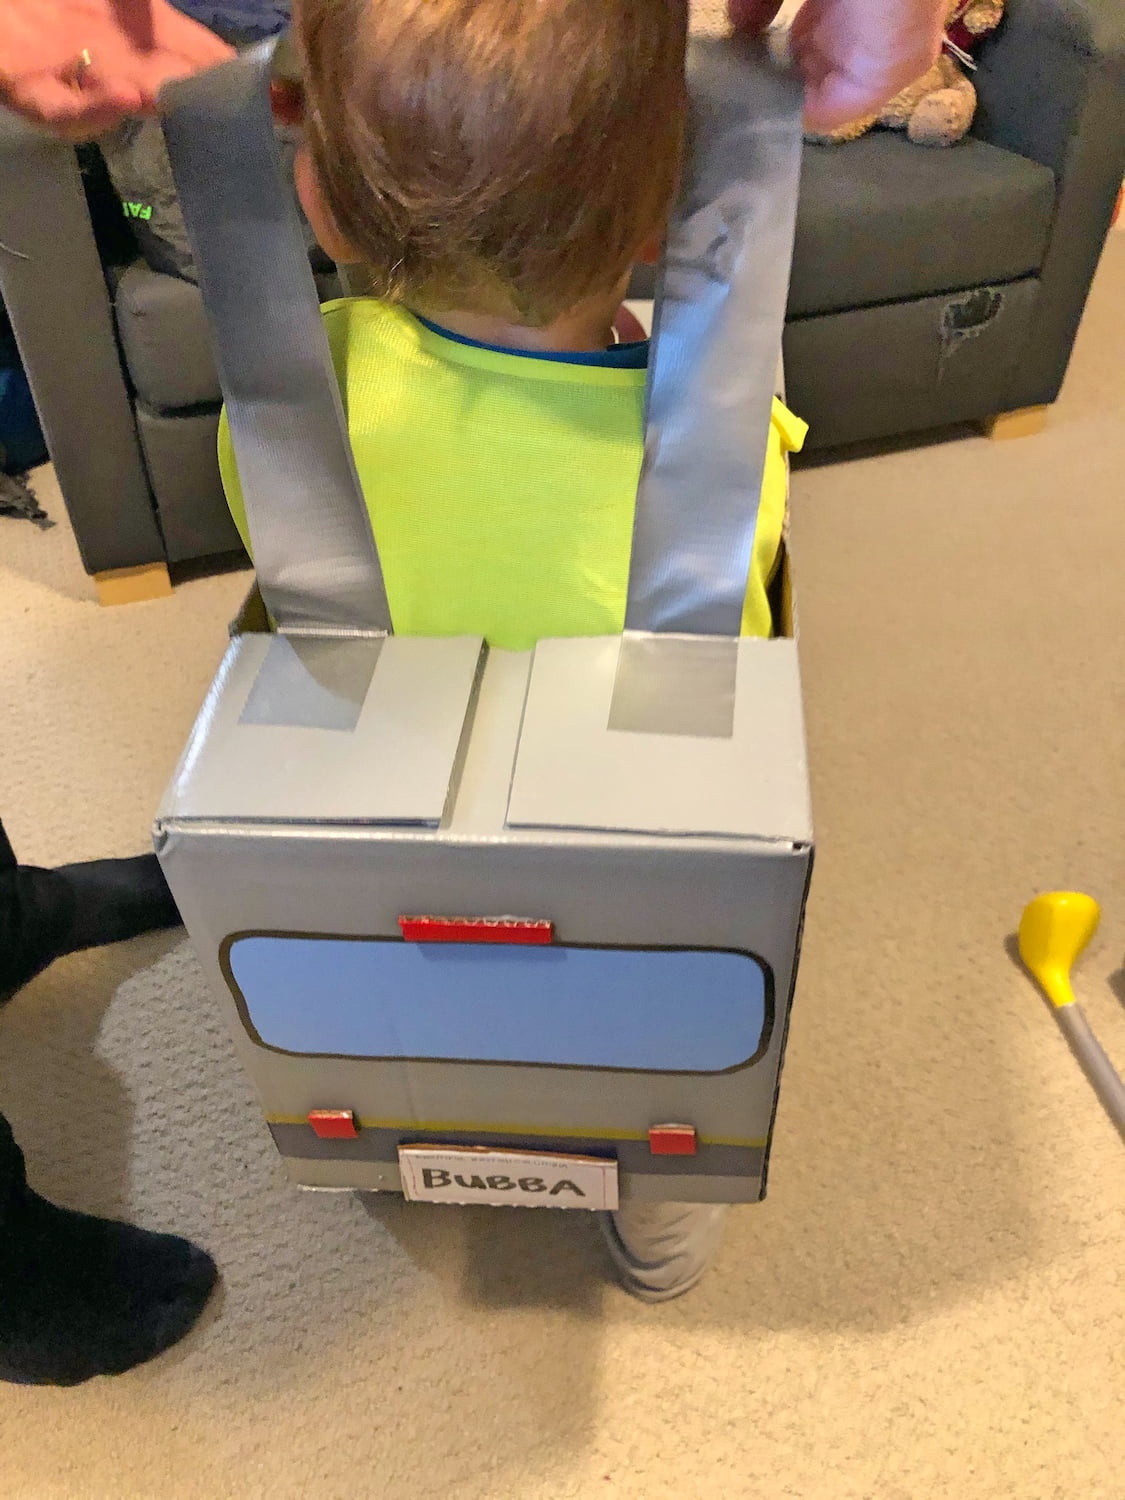 Toddler in a Home Made Bus Costume